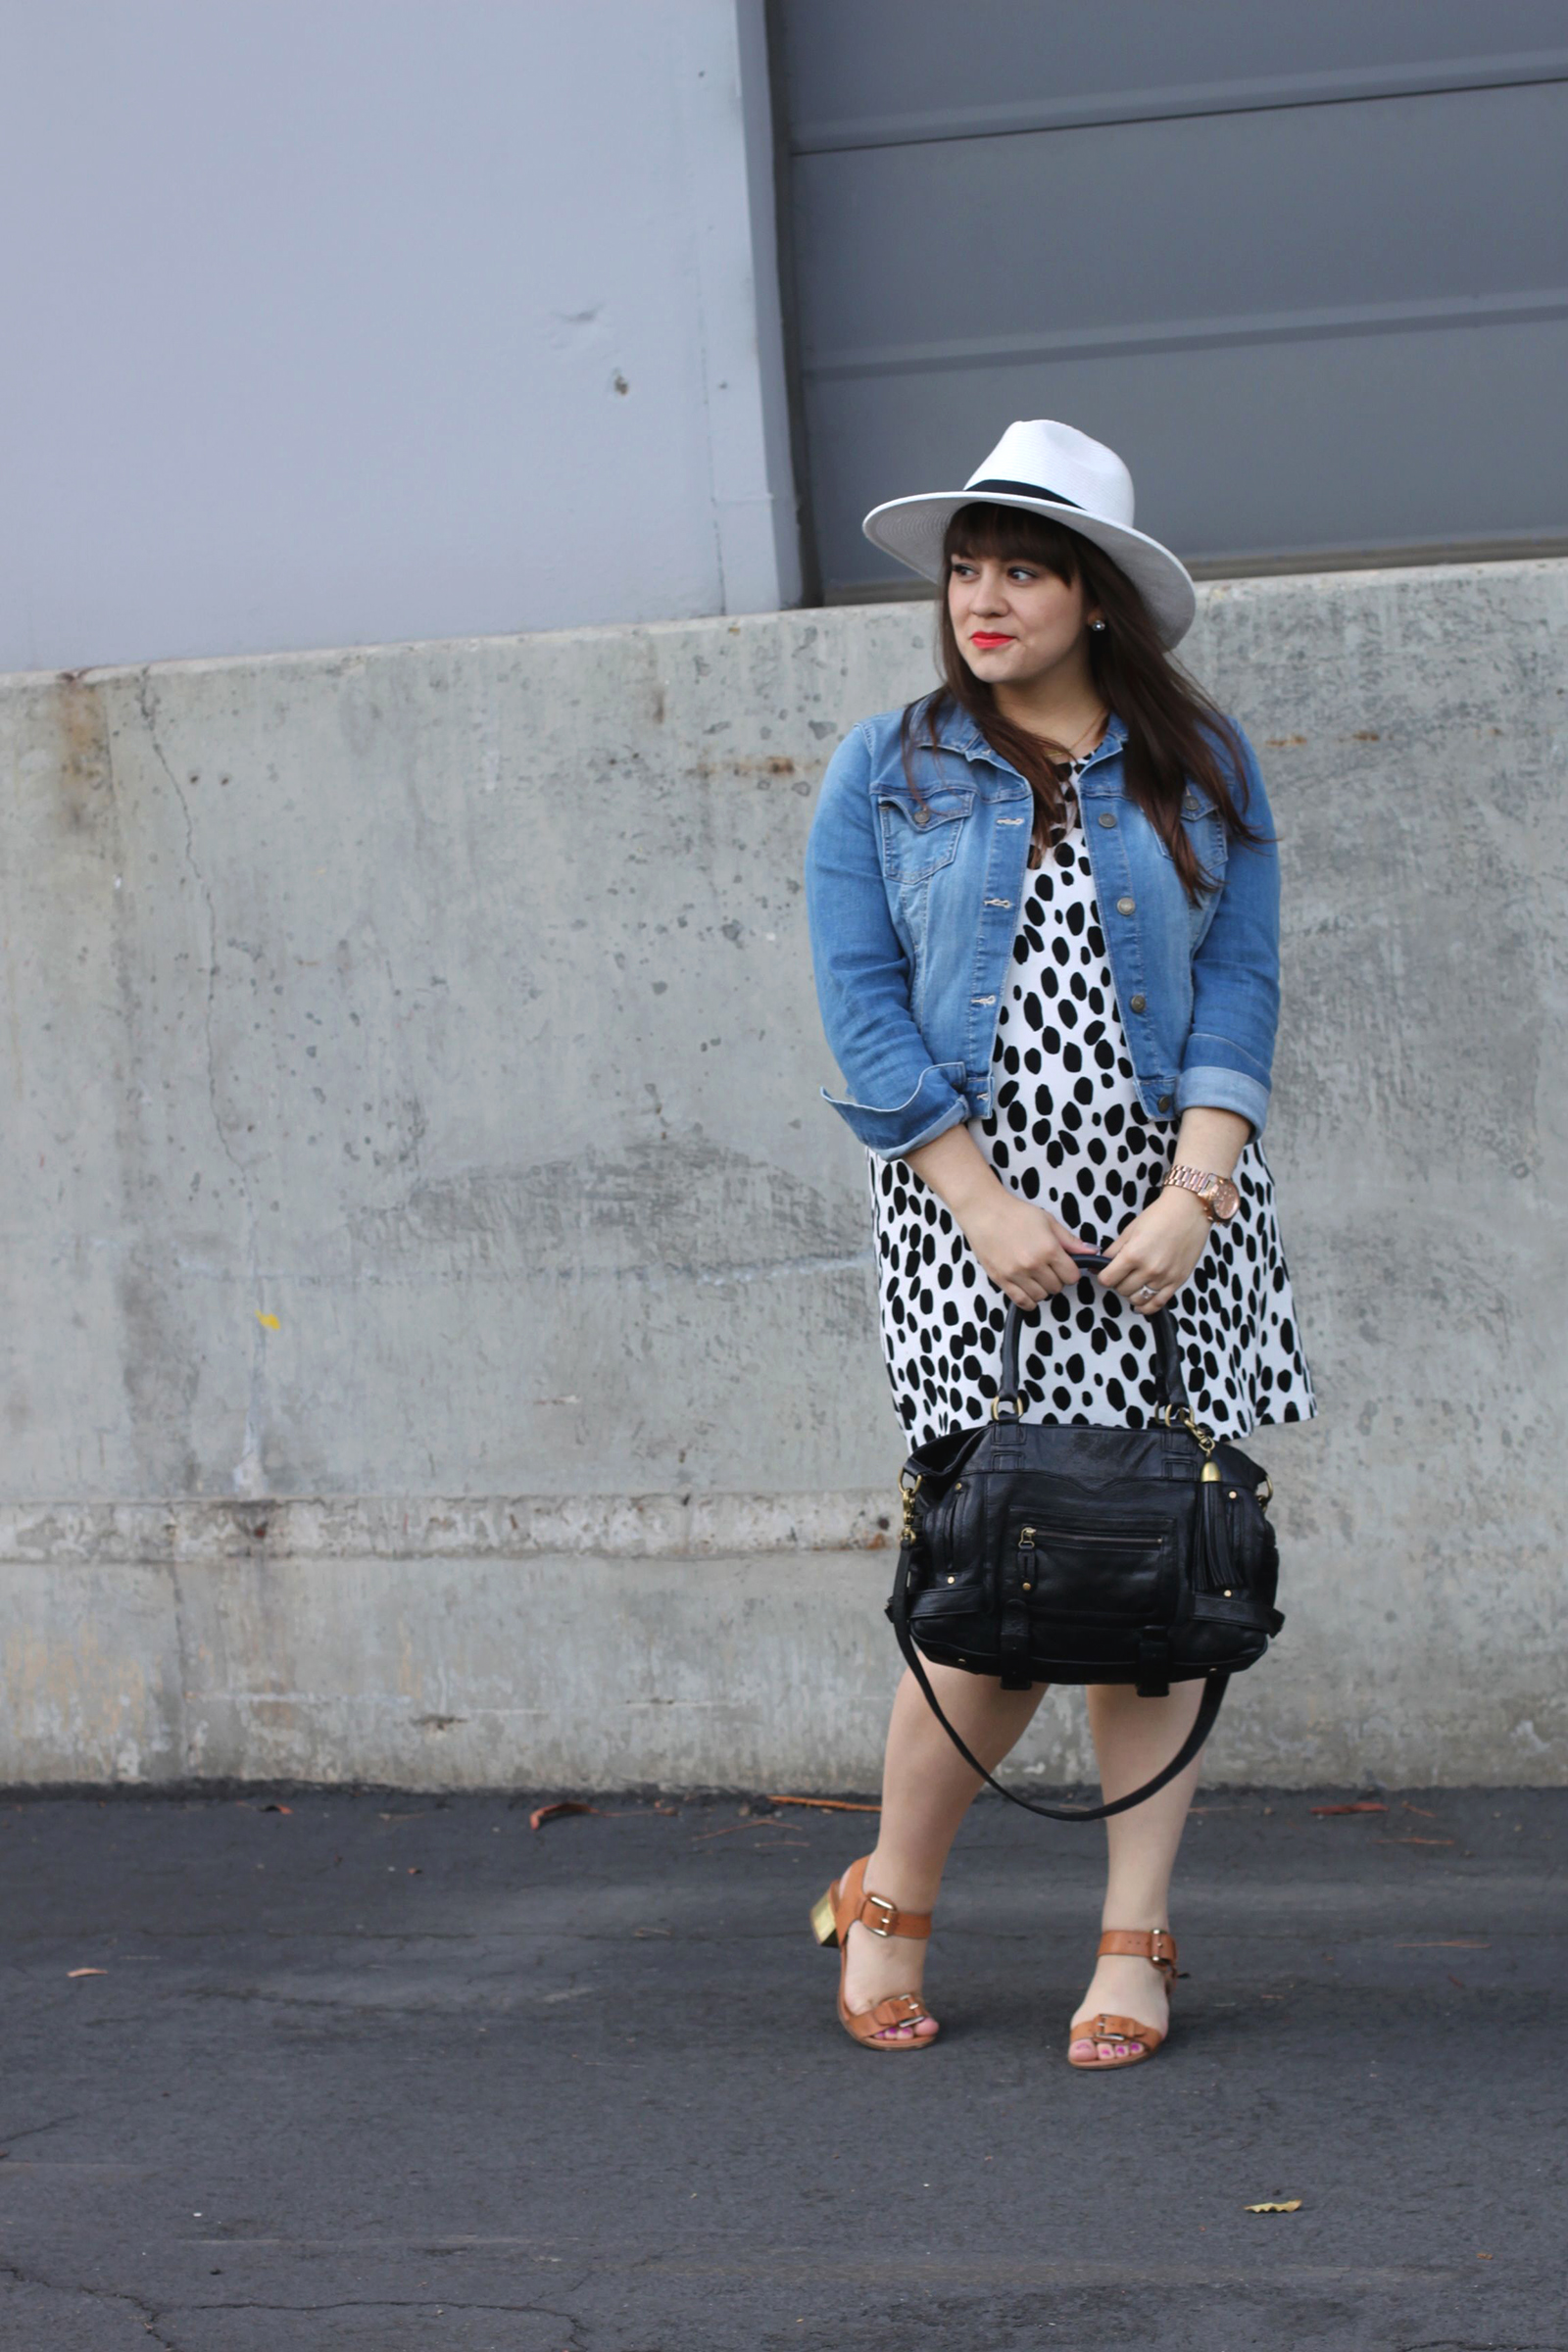 Maternity Remix: If the Hat Fits, Wear It